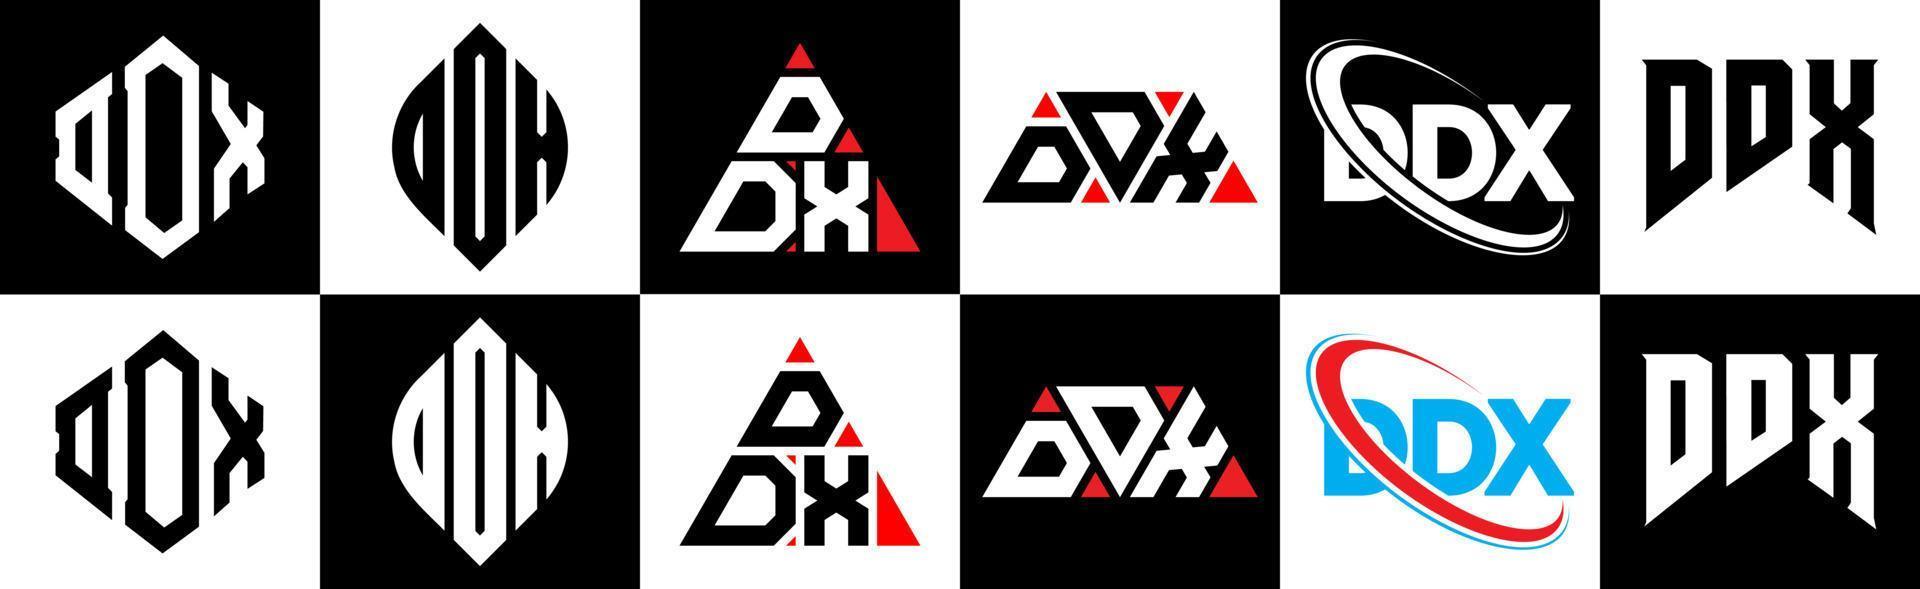 DDX letter logo design in six style. DDX polygon, circle, triangle, hexagon, flat and simple style with black and white color variation letter logo set in one artboard. DDX minimalist and classic logo vector